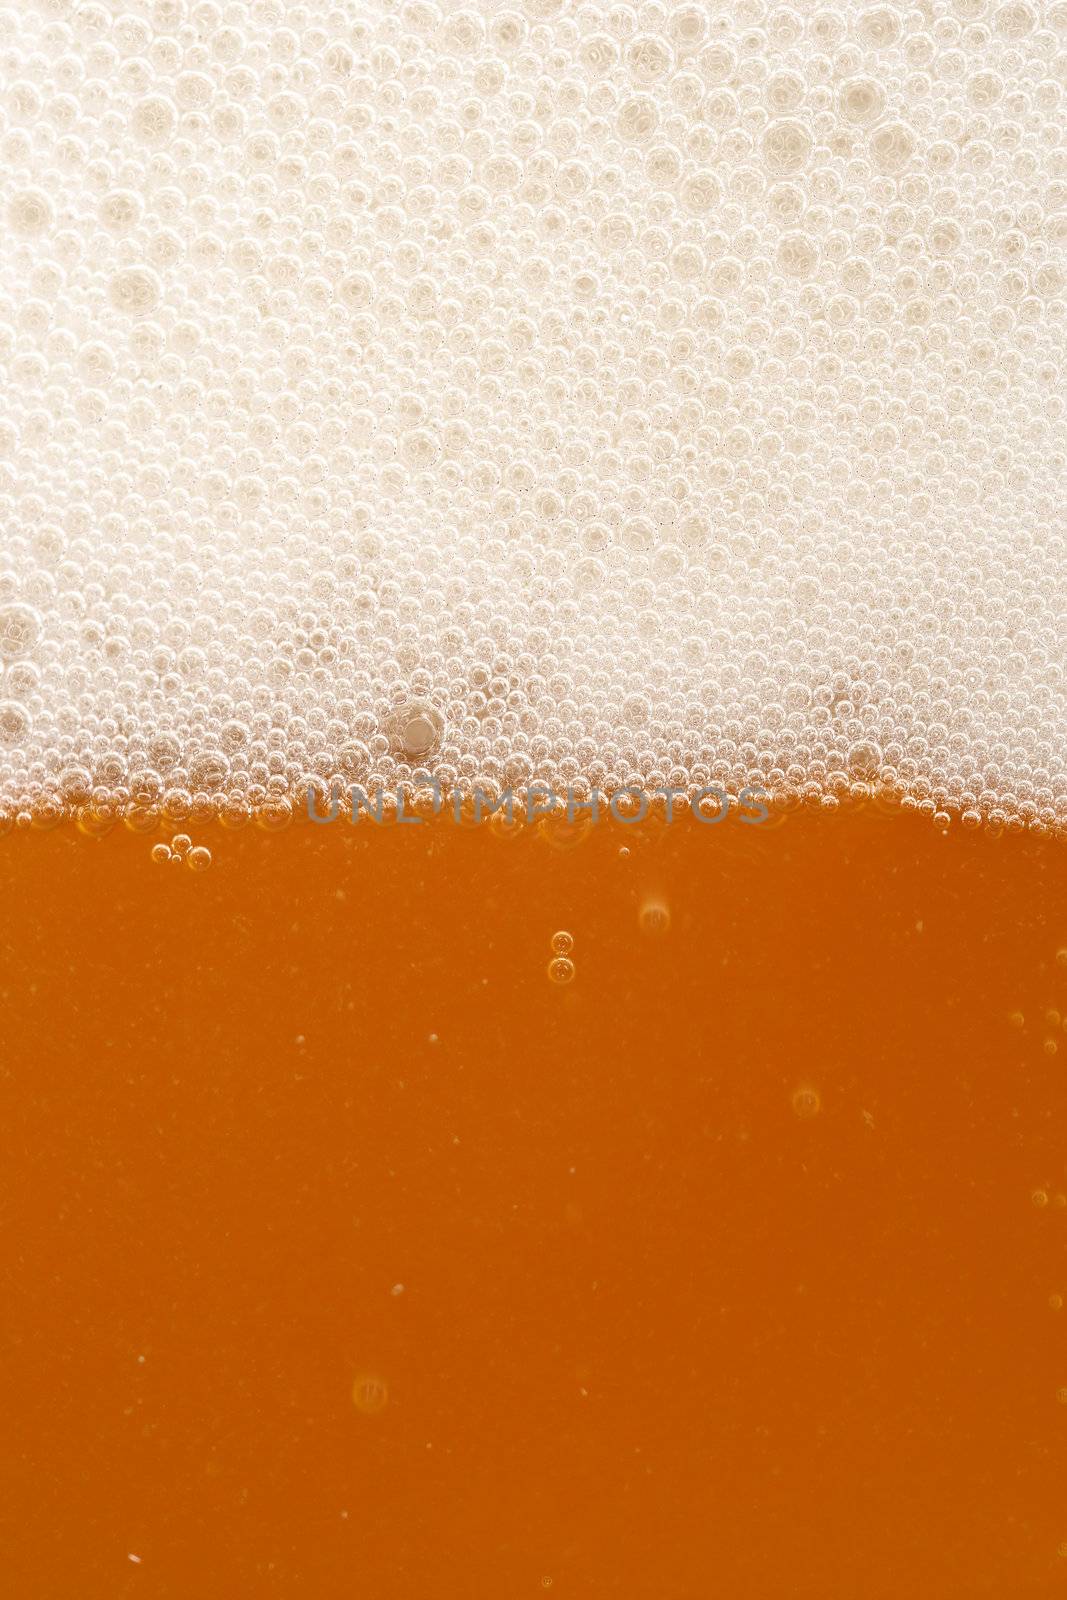 A macro image of a glass of amber beer.
